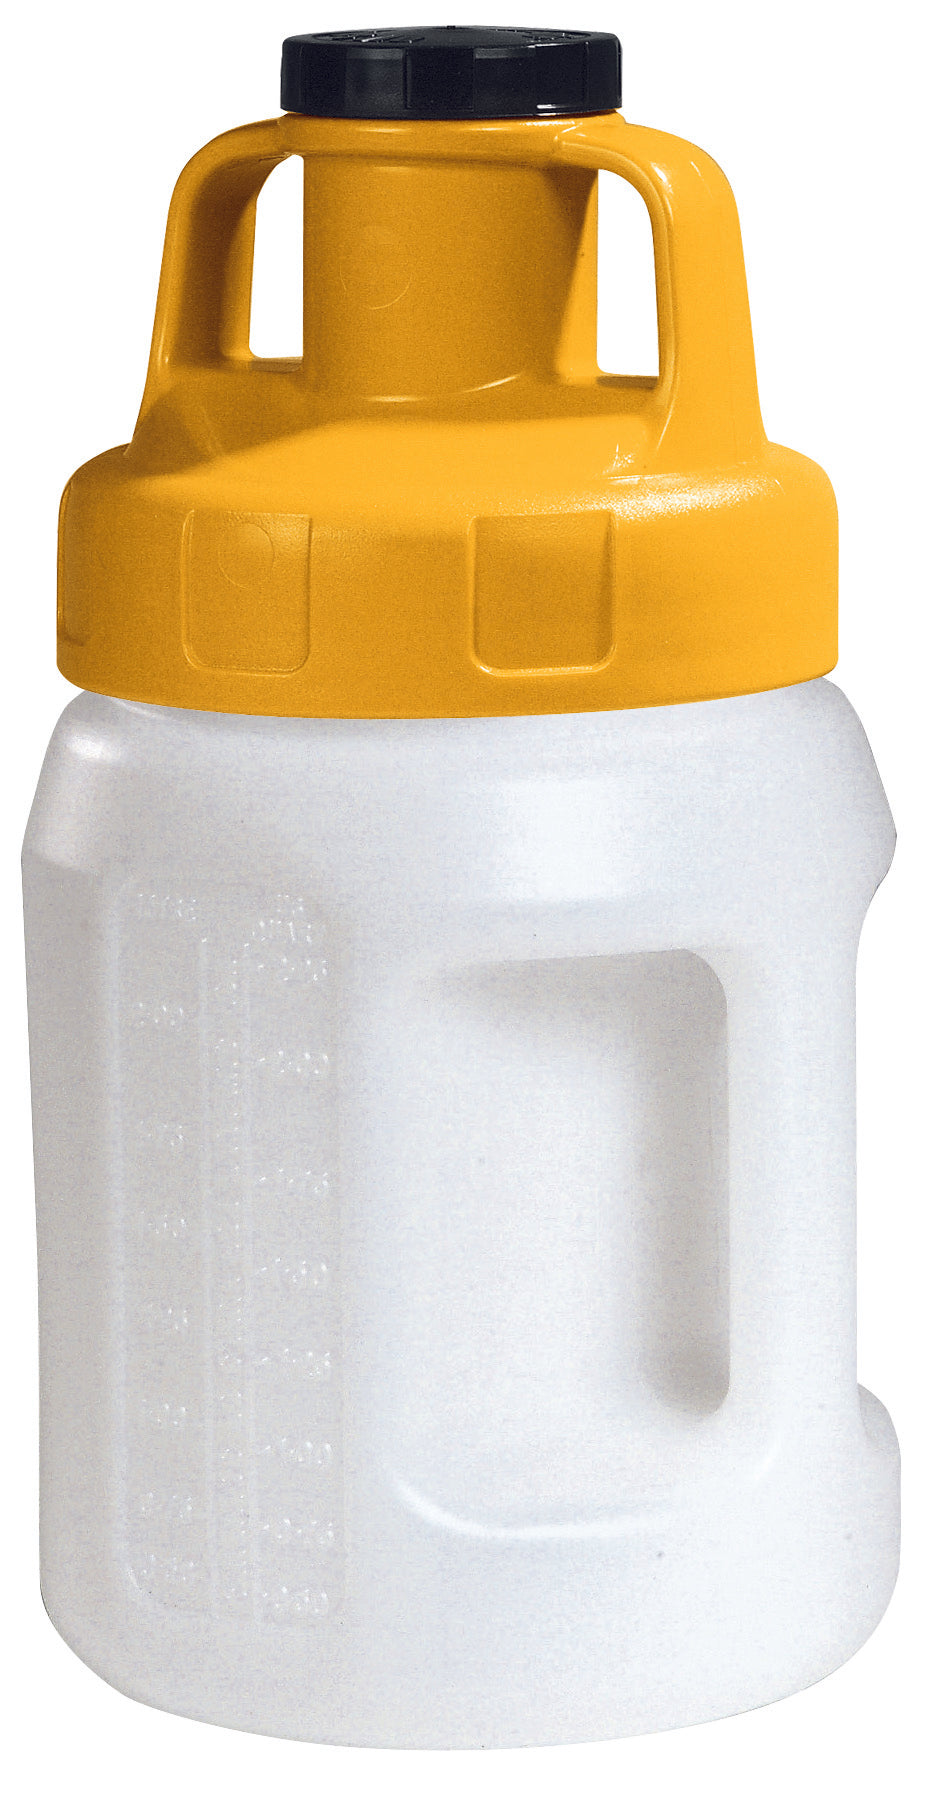 Oil can PE-HD white 2 L with yellow all-purpose lid, polyethylen (high density)